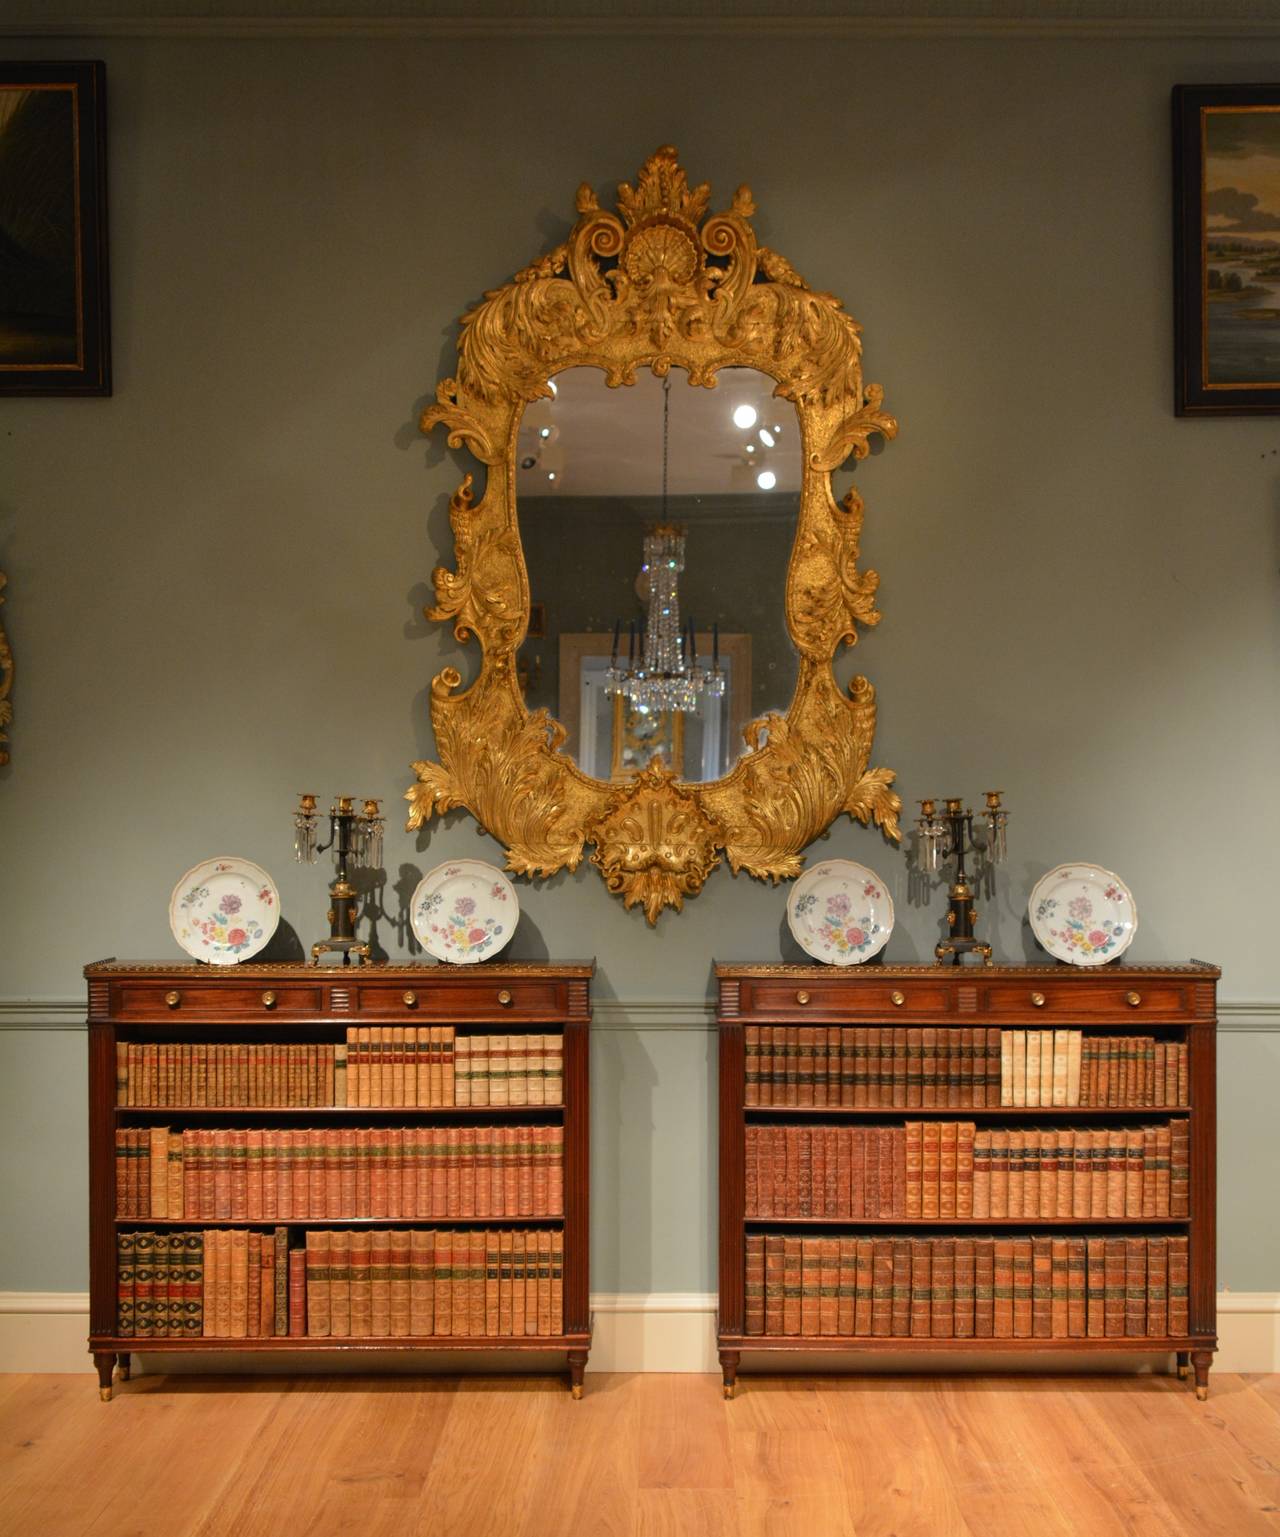 A fine pair of early 19th Century low mahogany bookshelves or display shelves, having lacquered brass gallery, handles and toupie feet, the galleried top over two shallow drawers below which are three shelves, standing on finely turned feet.